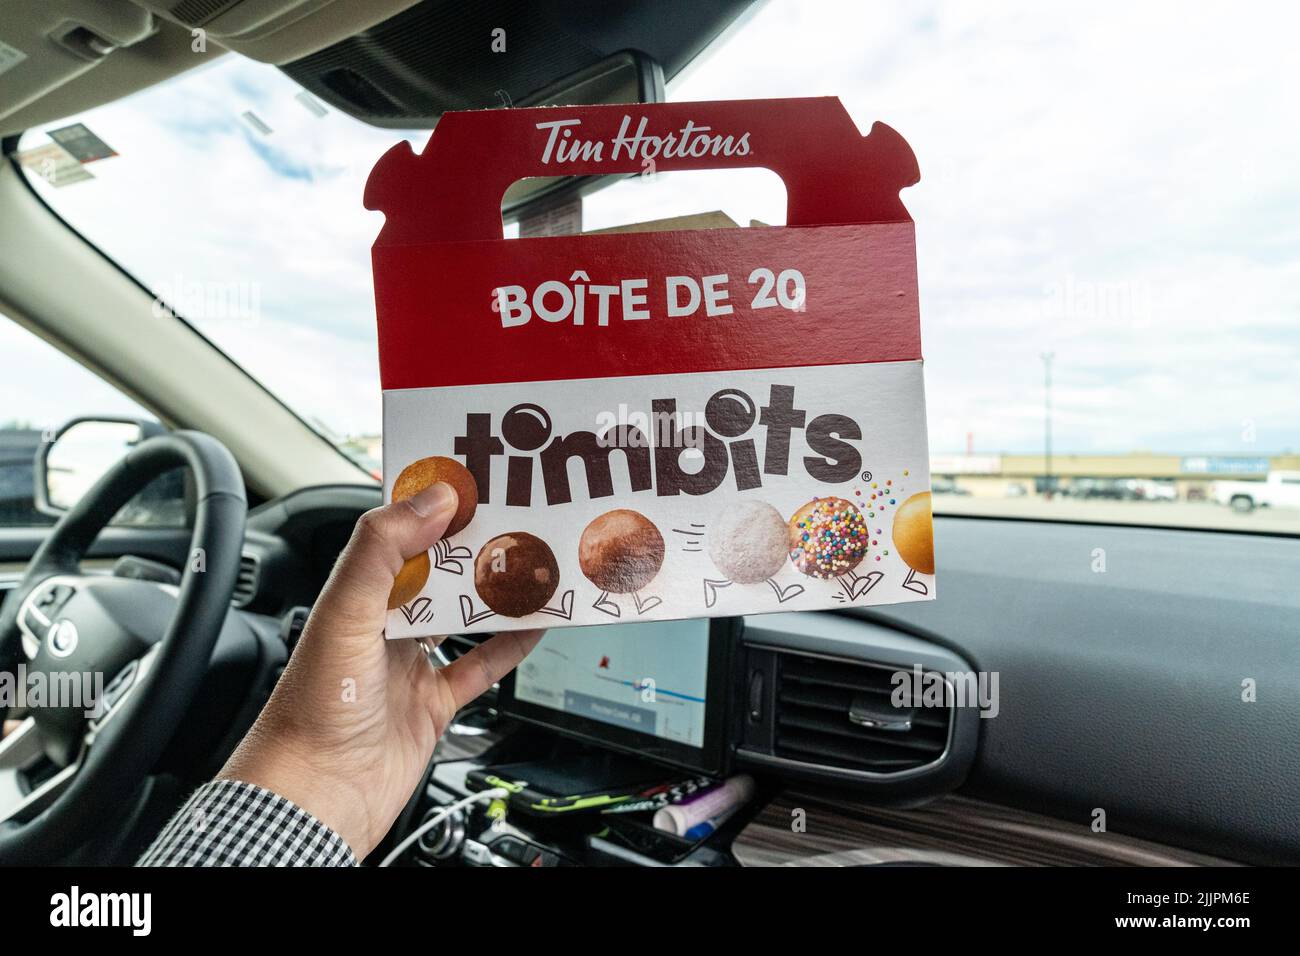 Pincher Creek, Alberta, Canada - July 6, 2022: Hand holds up a box of Tim Horton's Timbits donut holes, while in a car Stock Photo